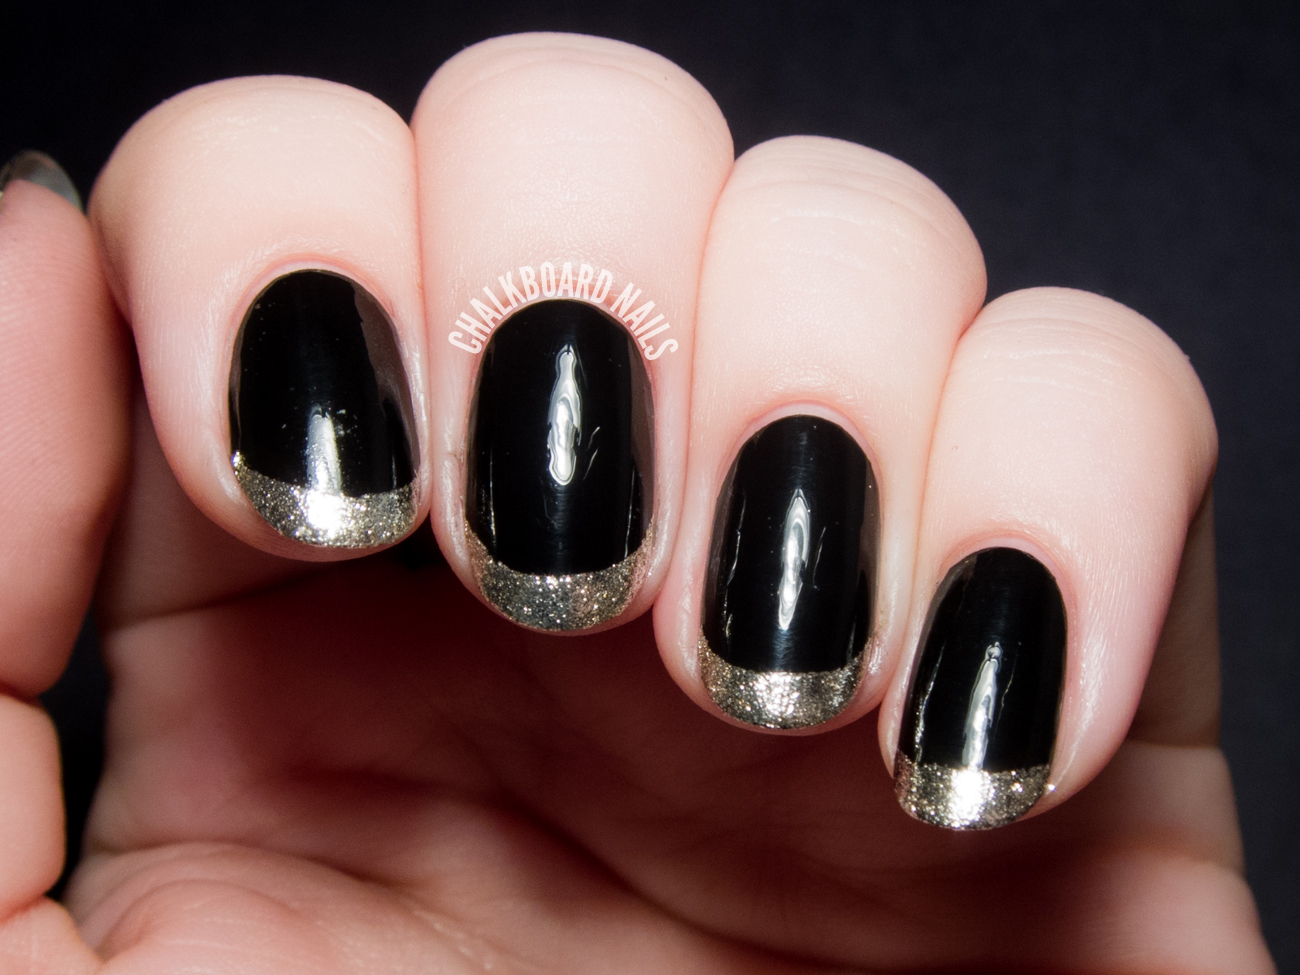 Metallic gold French tips by @chalkboardnails